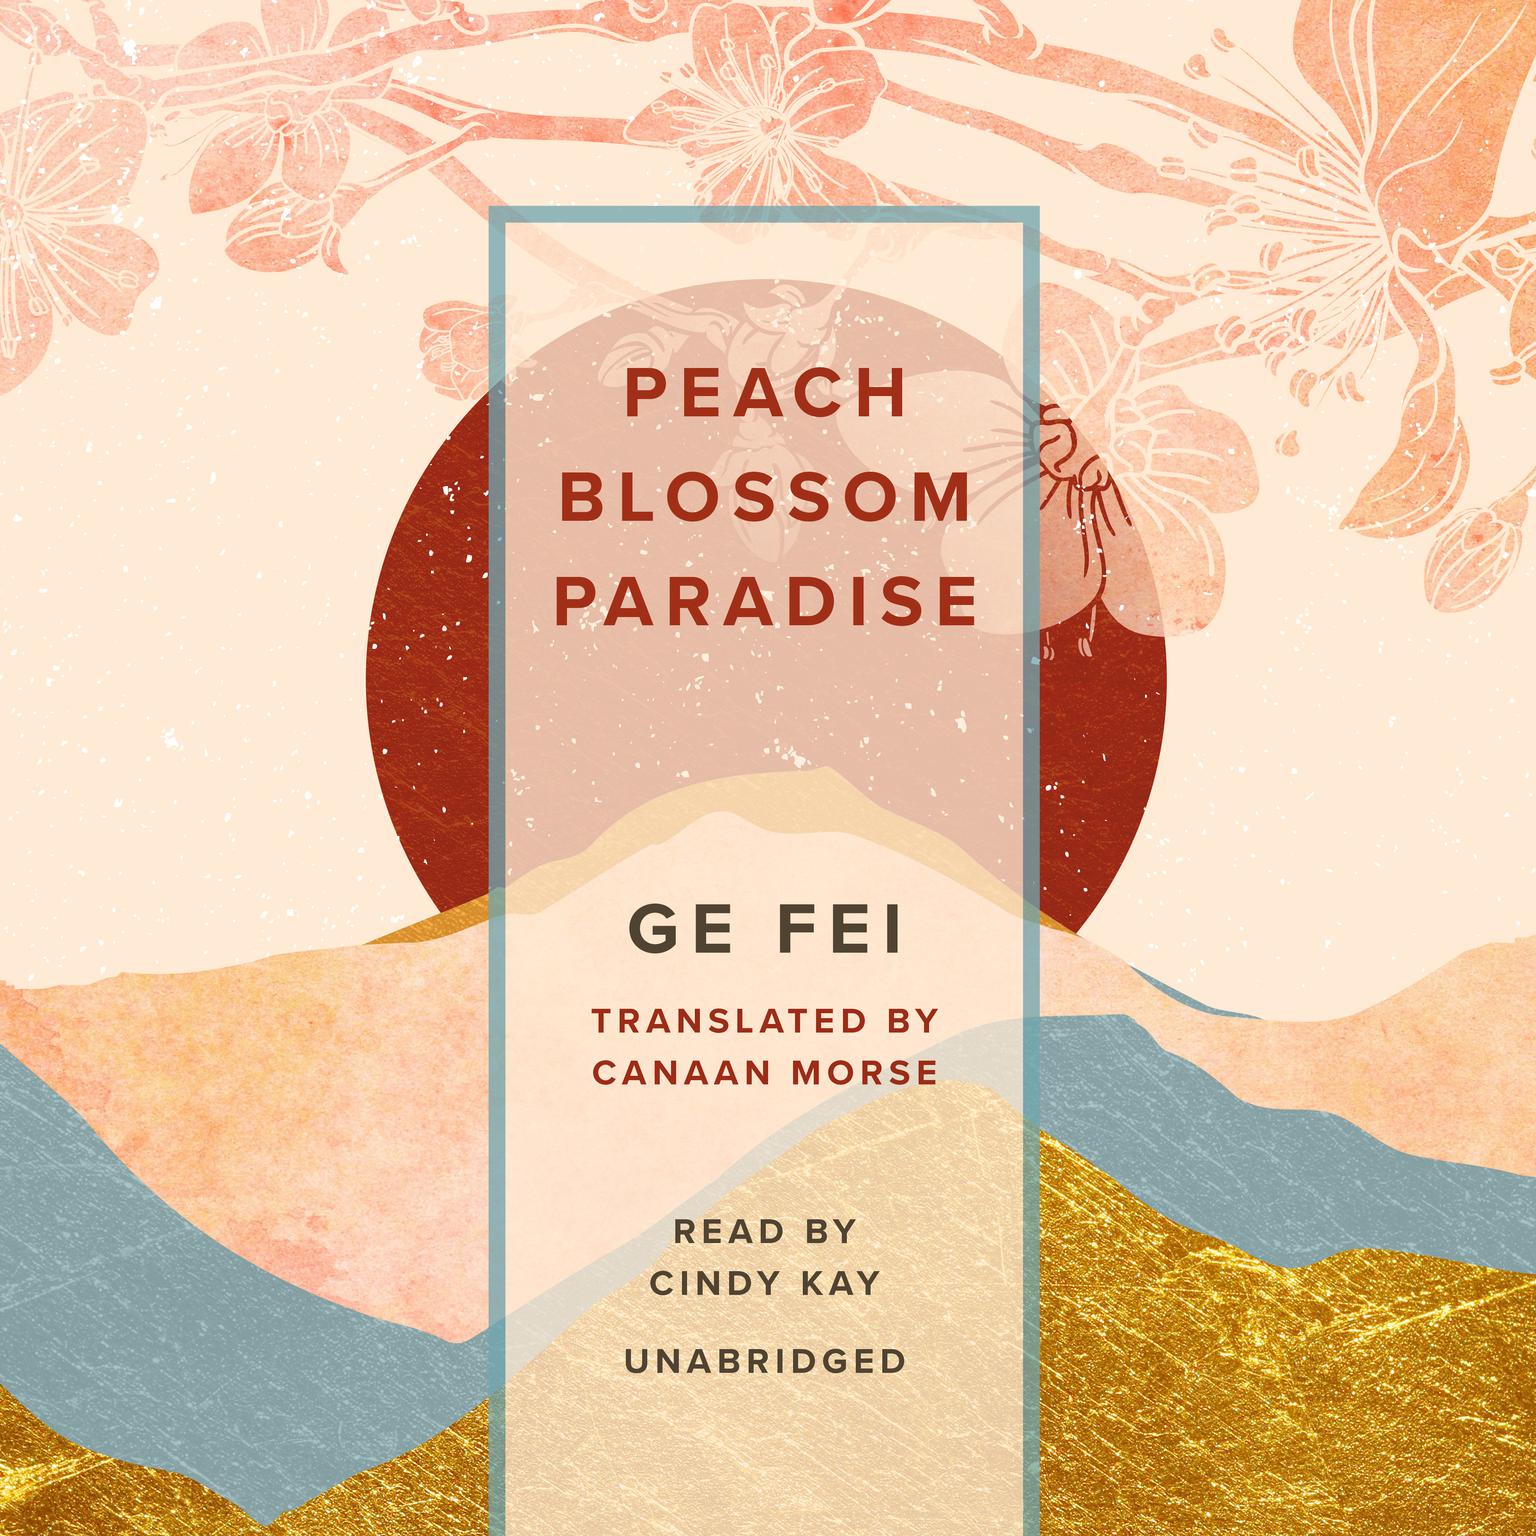 Peach Blossom Paradise Audiobook, by Ge Fei